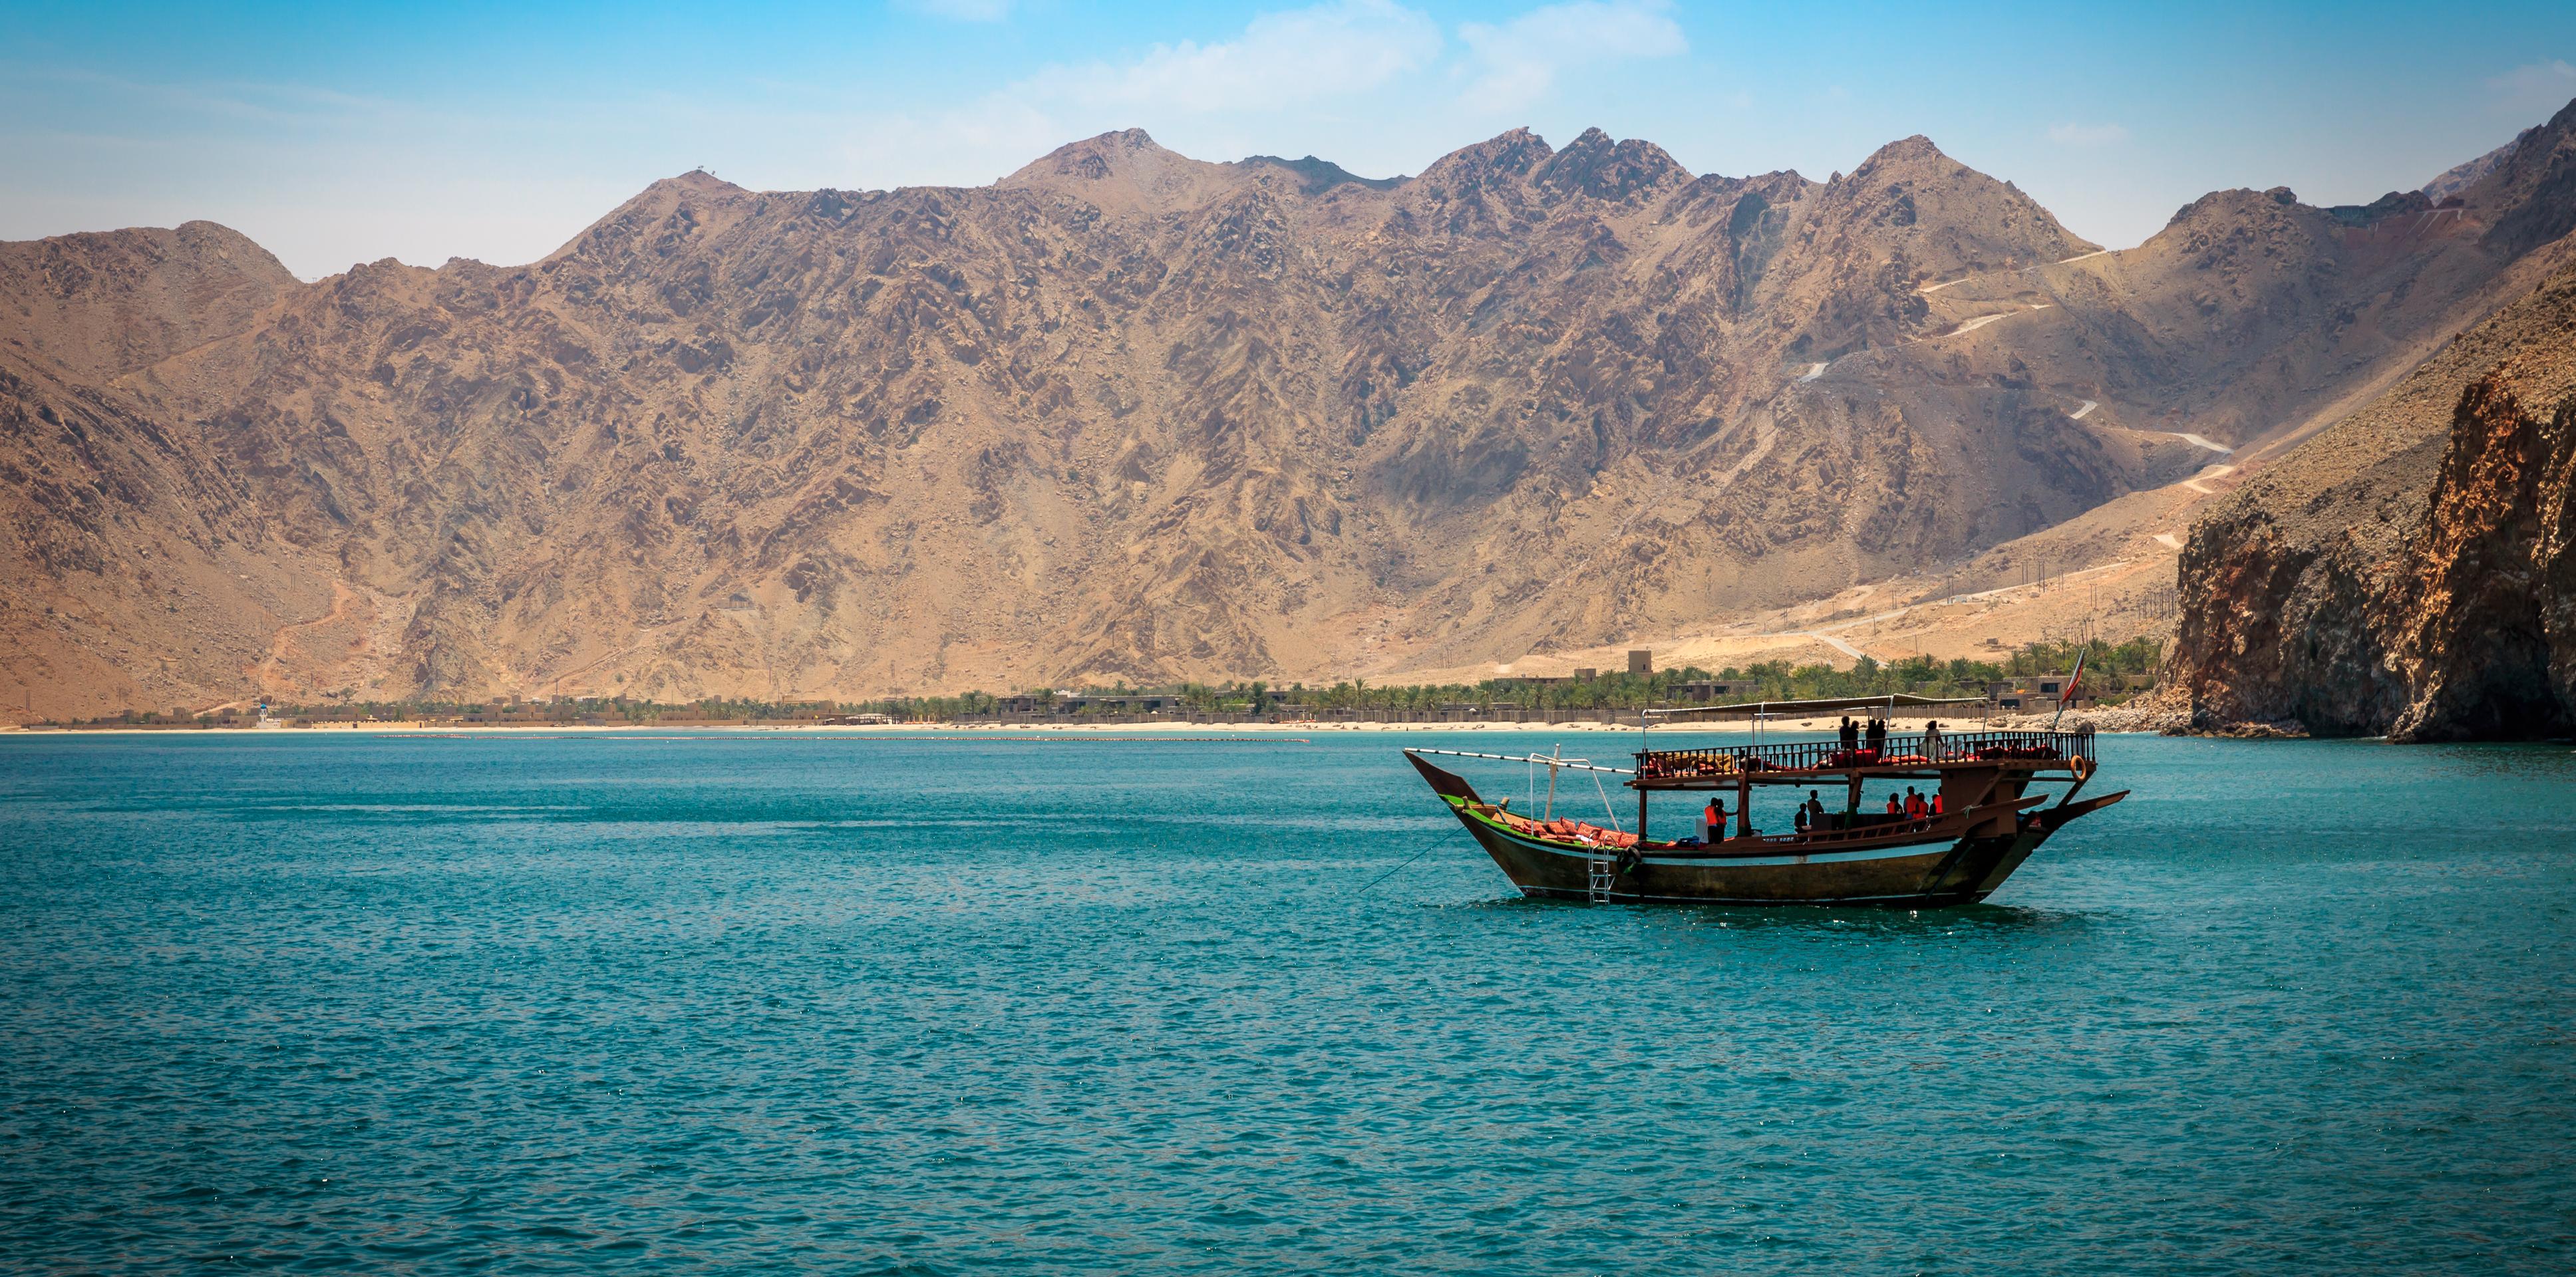 Cruise of the Musandam Fjords in Oman - Departure from Dubai